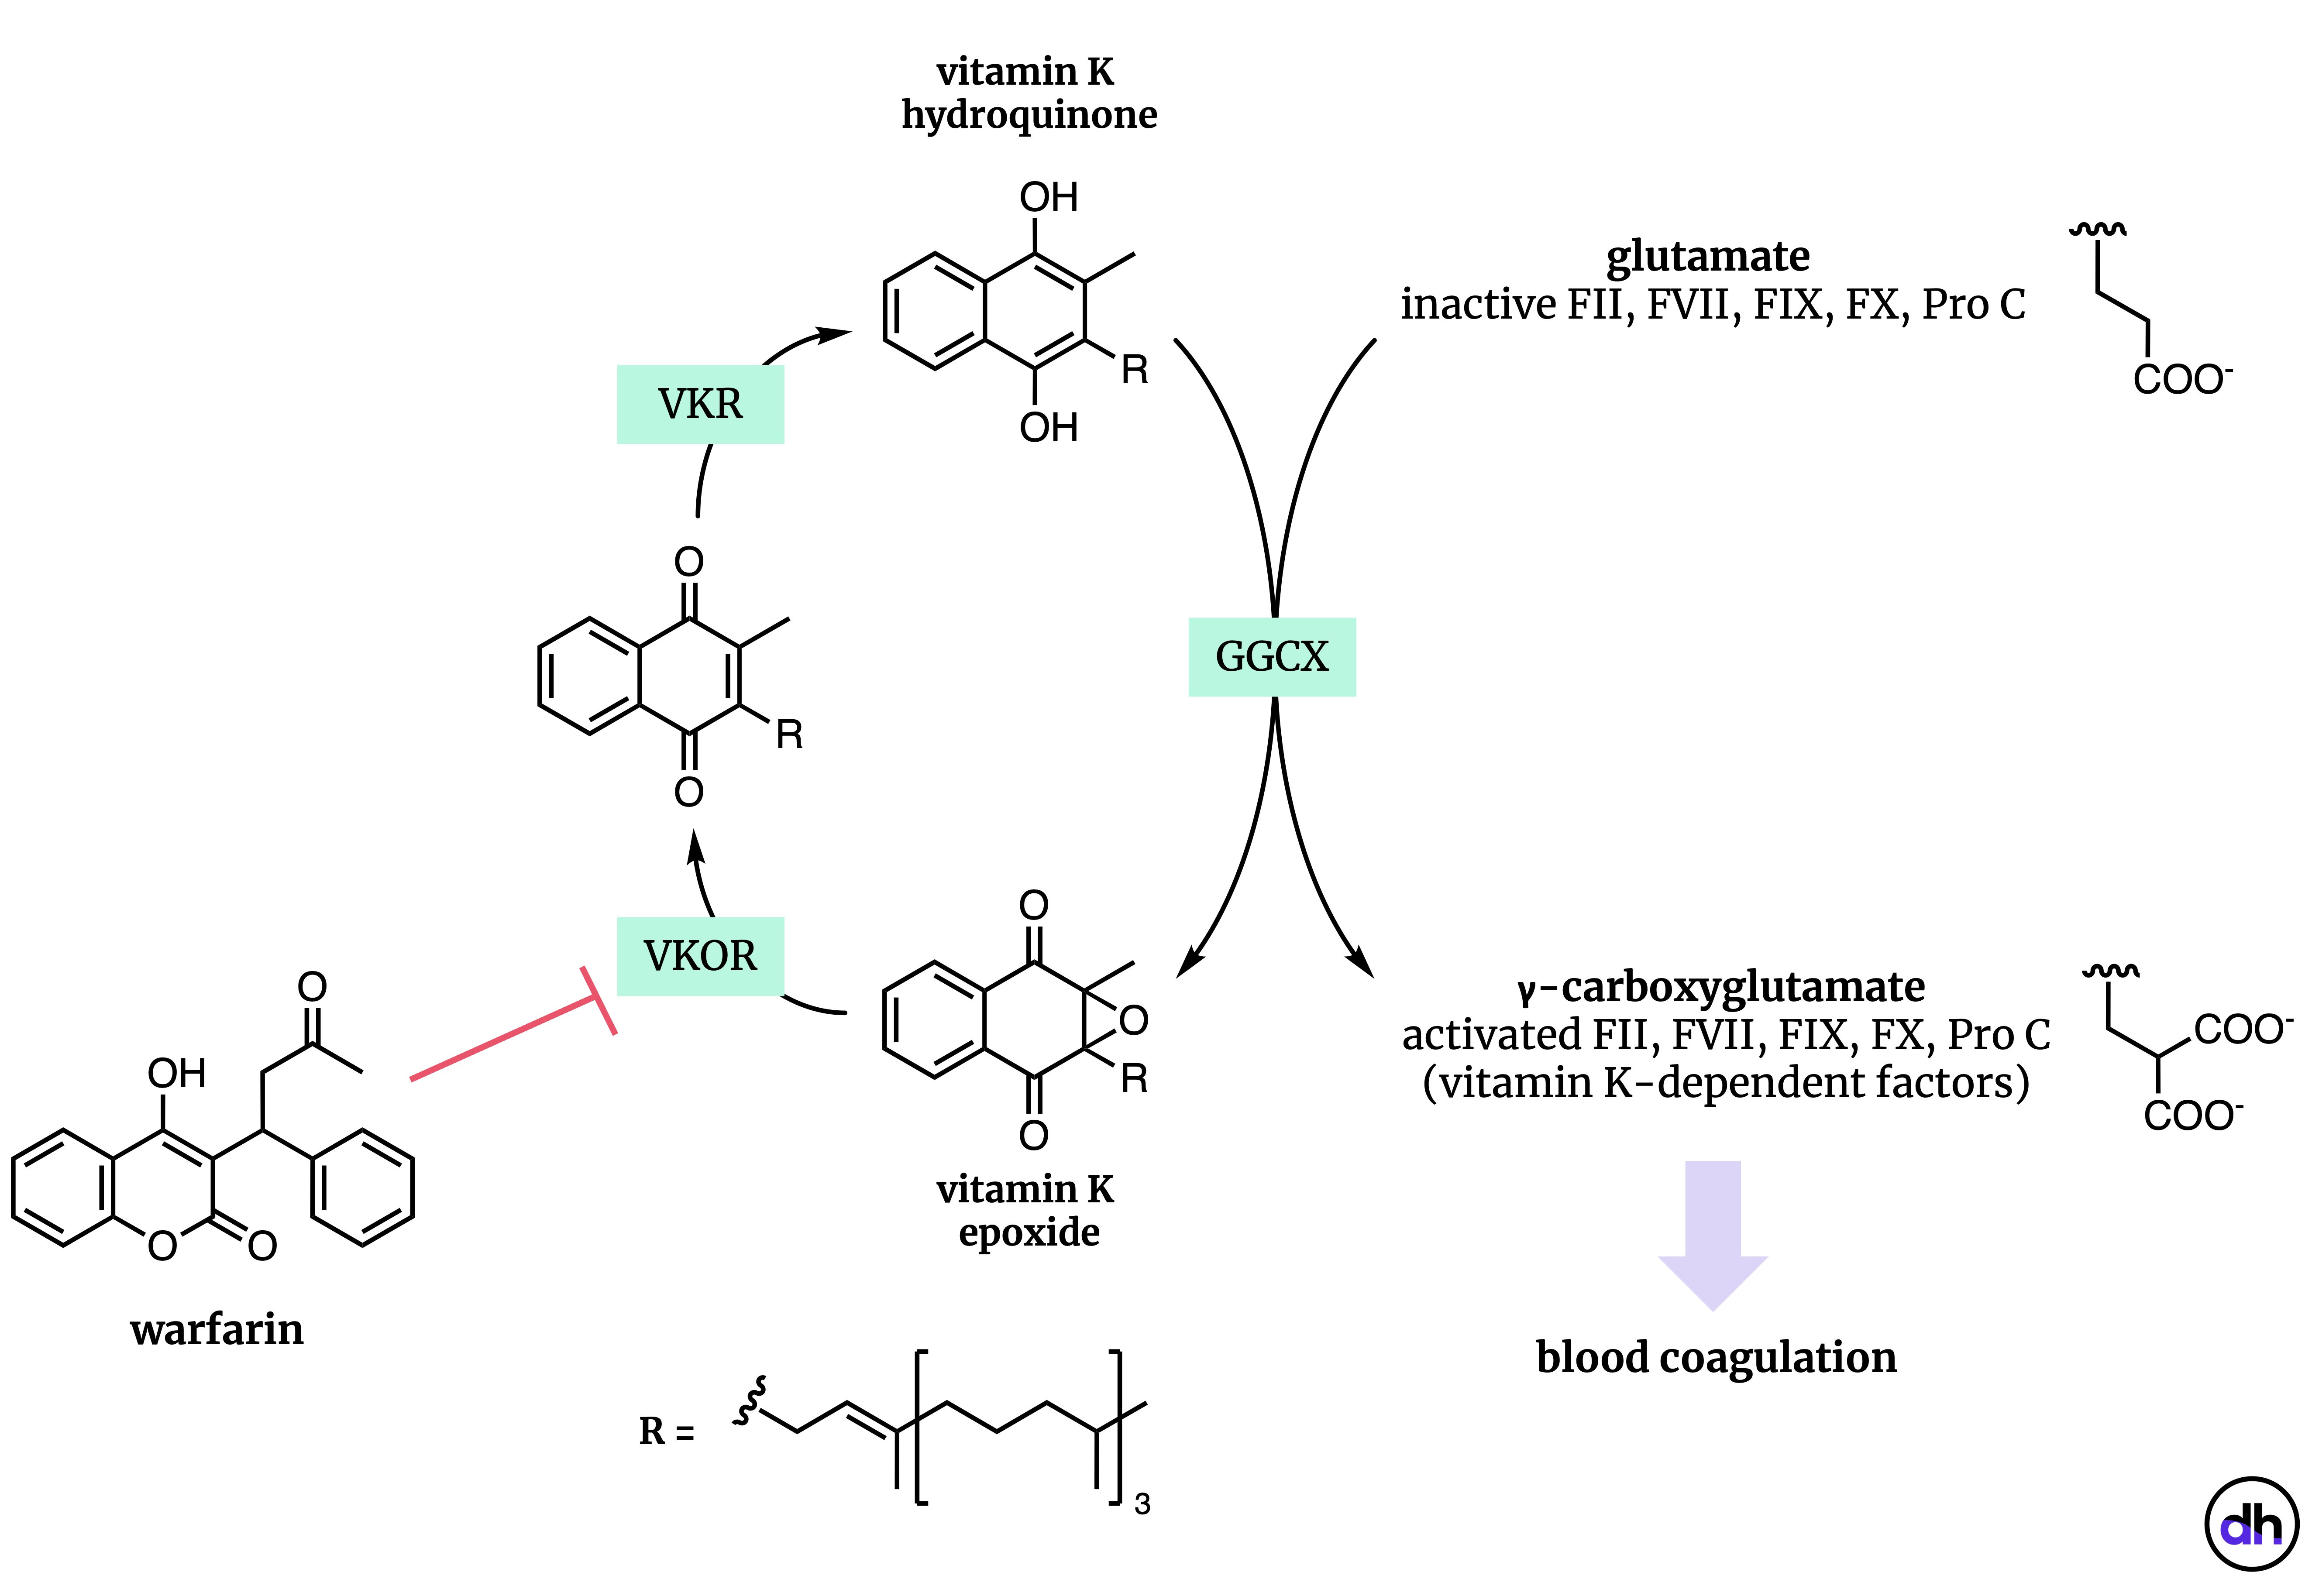 Figure 3. The vitamin K redox cycle and the mechanism of action of warfarin. Warfarin inhibits VKOR, which is essential for vitamin K turnover. Vitamin K hydroquinone is involved in a key step of the activation of clotting factors like Factor X, in which a glutamate residue is carboxylated.